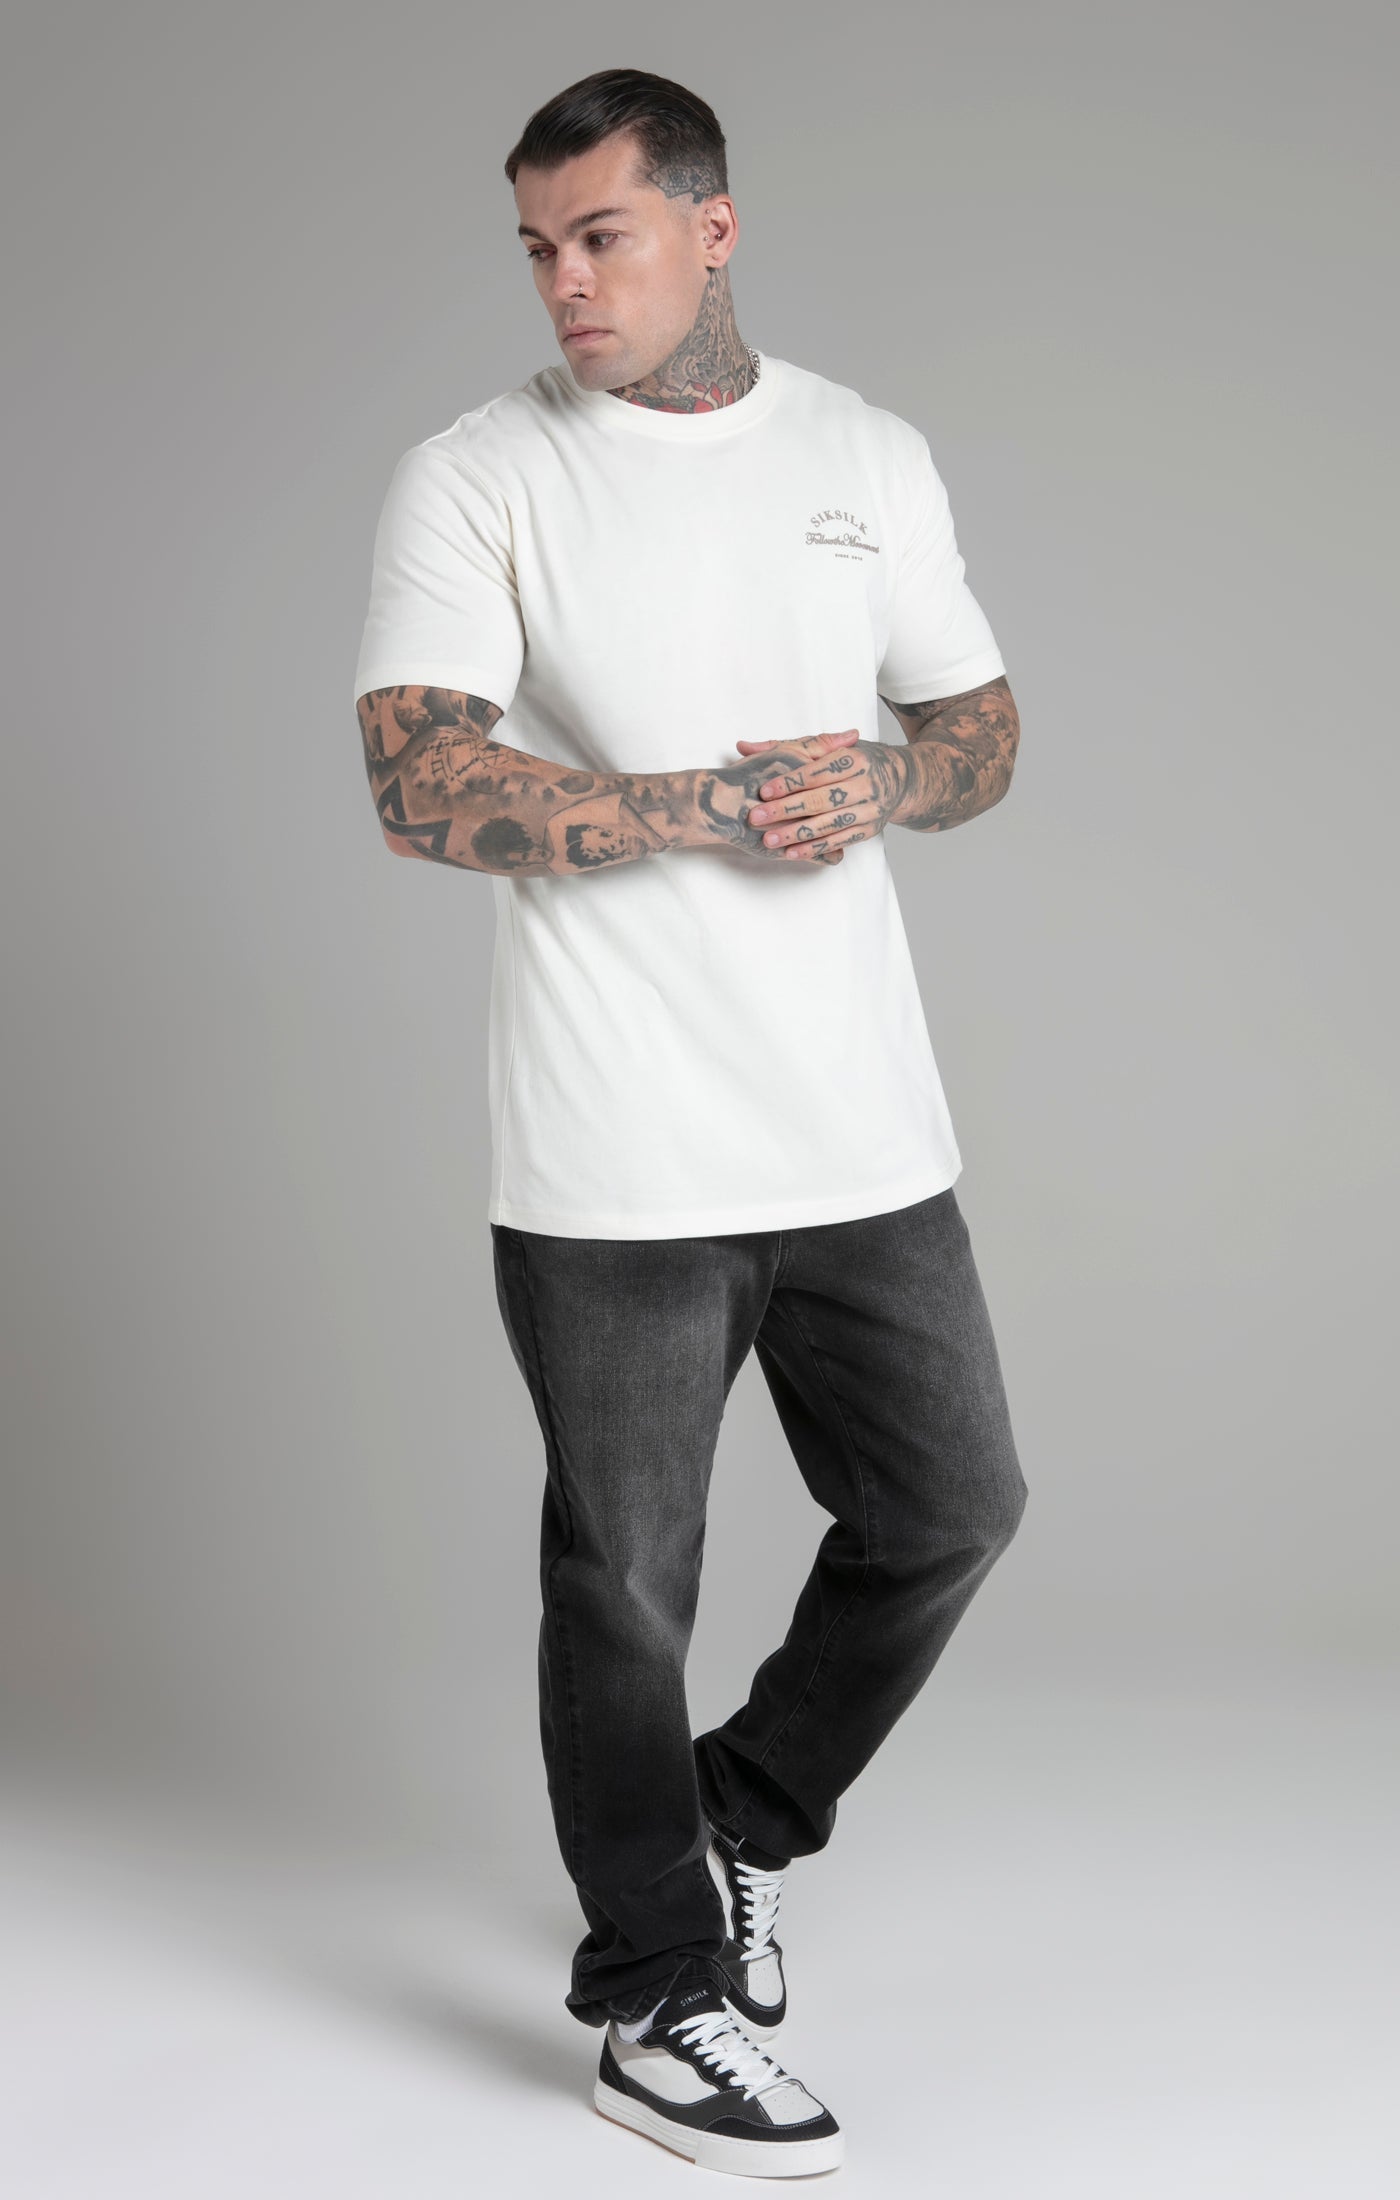 Relaxed Fit T-Shirt in Ecru T-Shirts SikSilk   